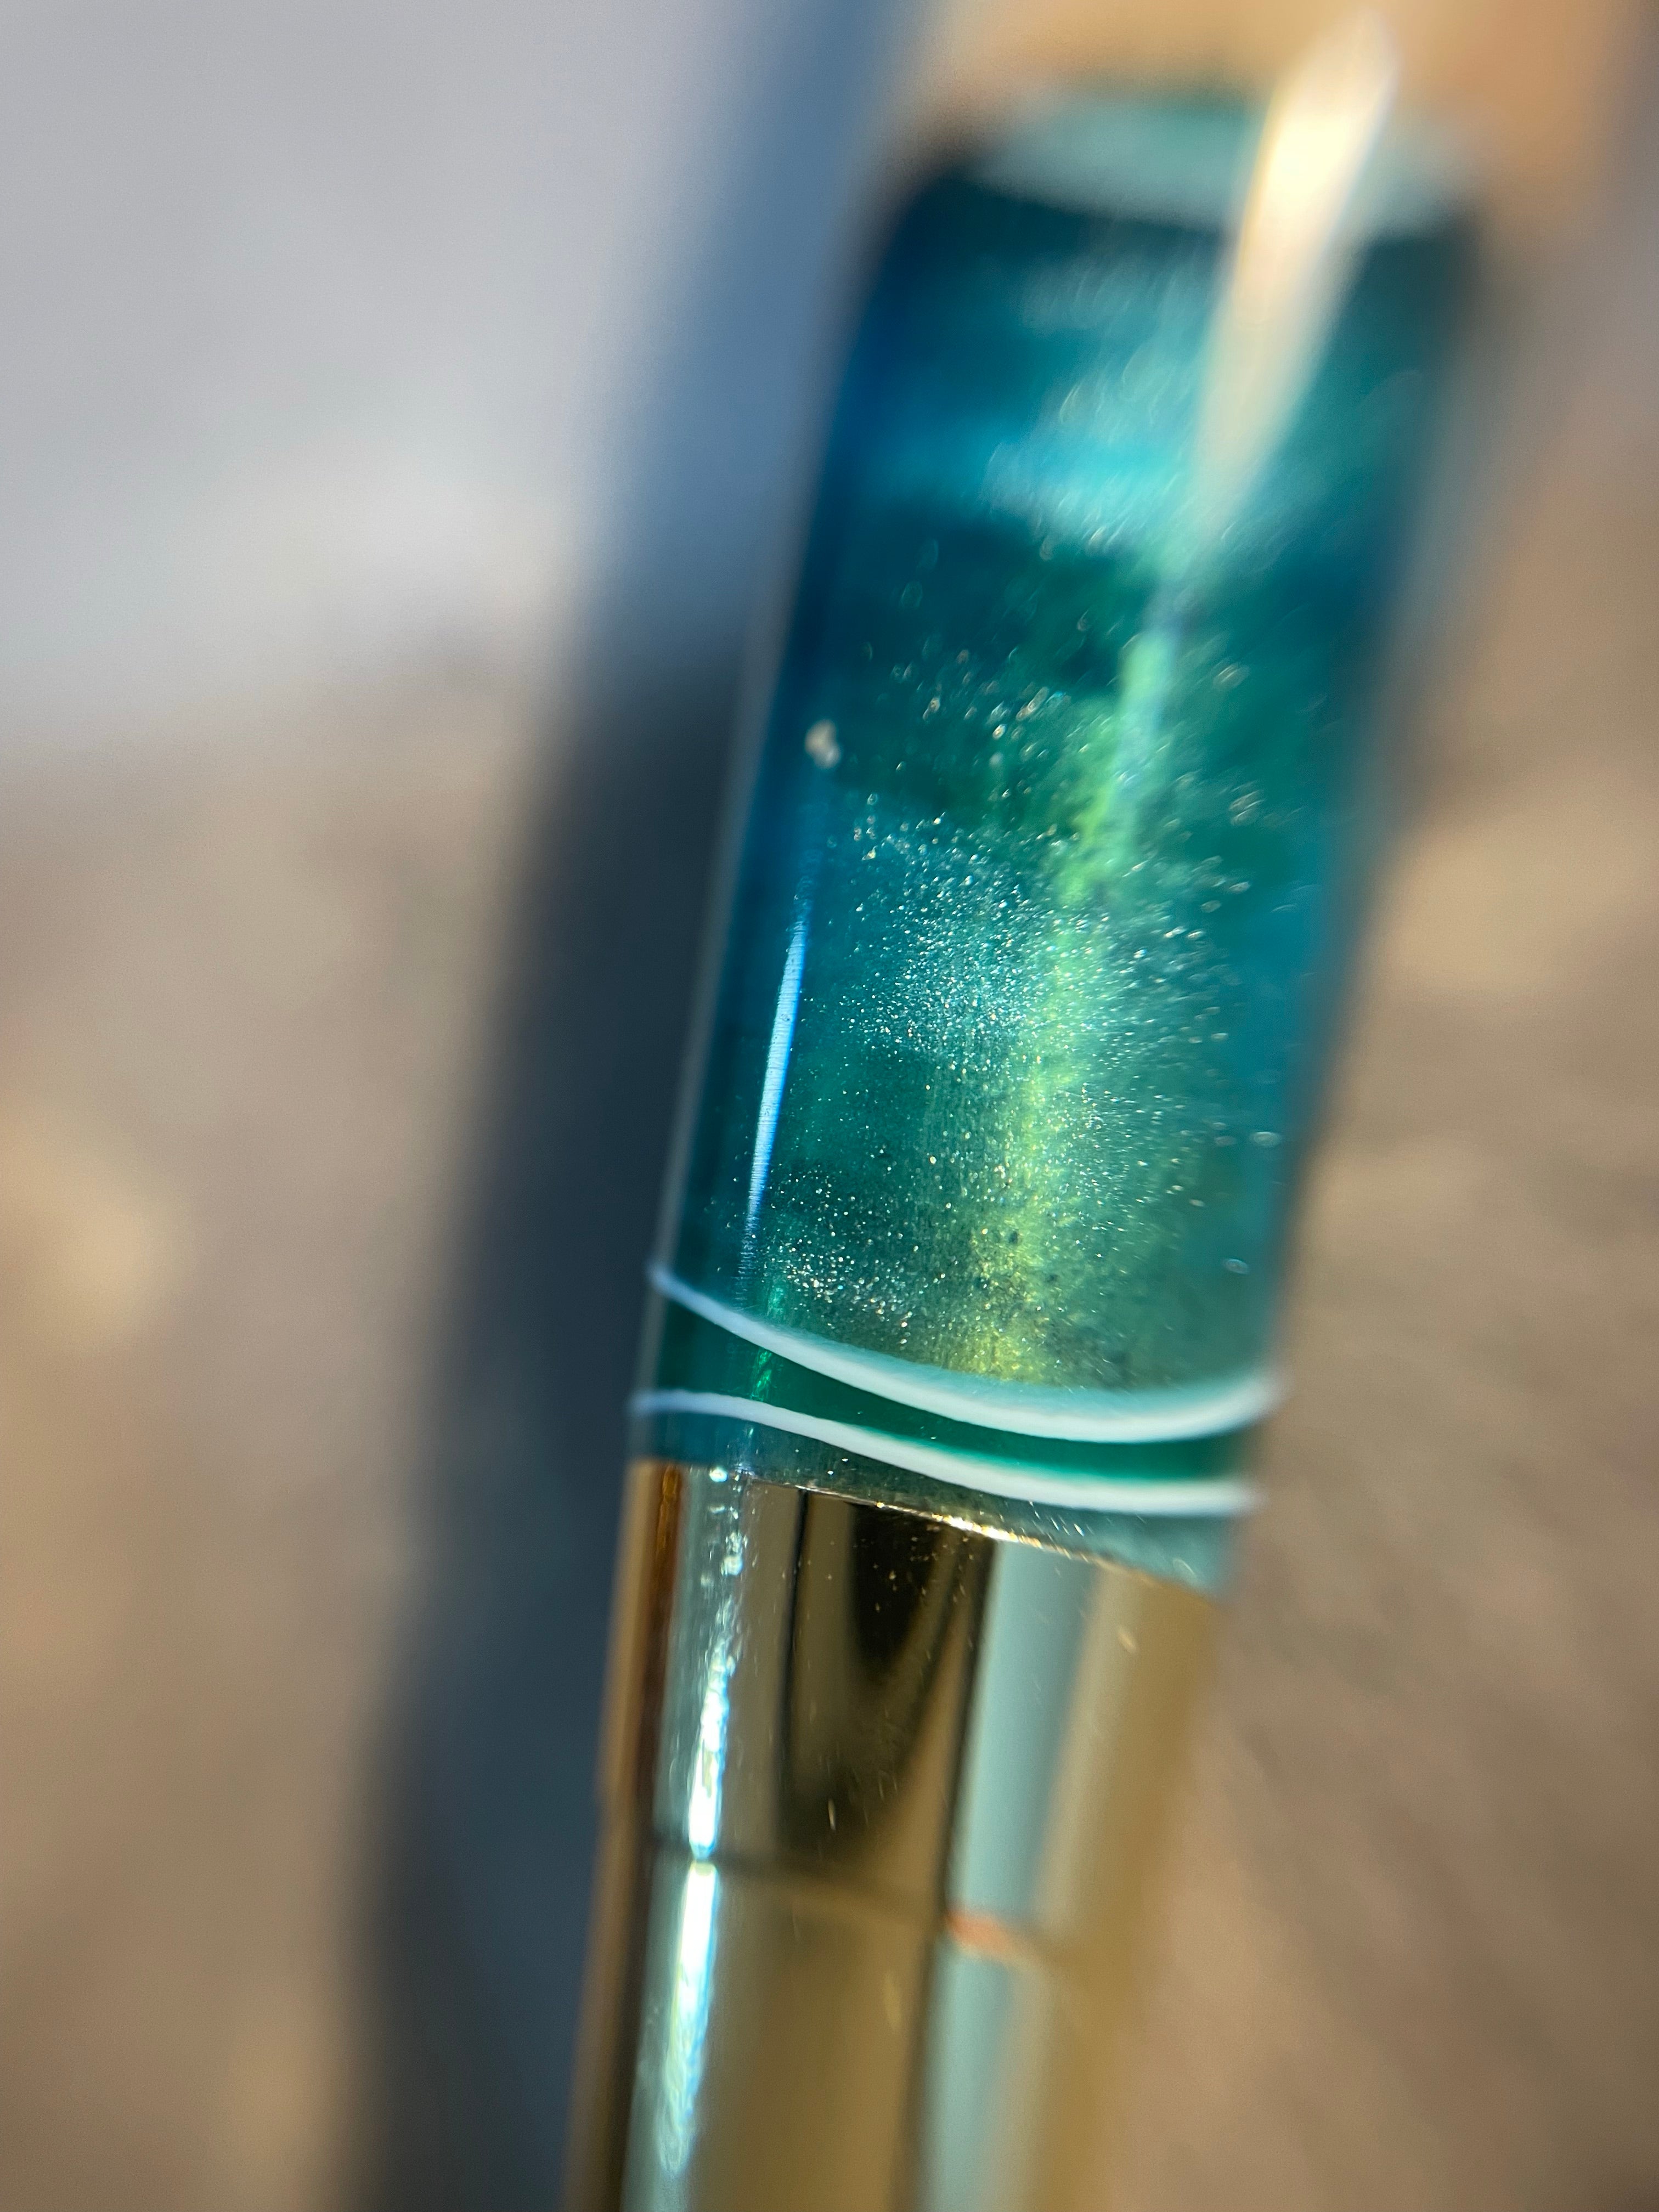 Handmade Olive Wood &amp; Turquoise Liquid Glass Pen with Gold Details - EndlessWood